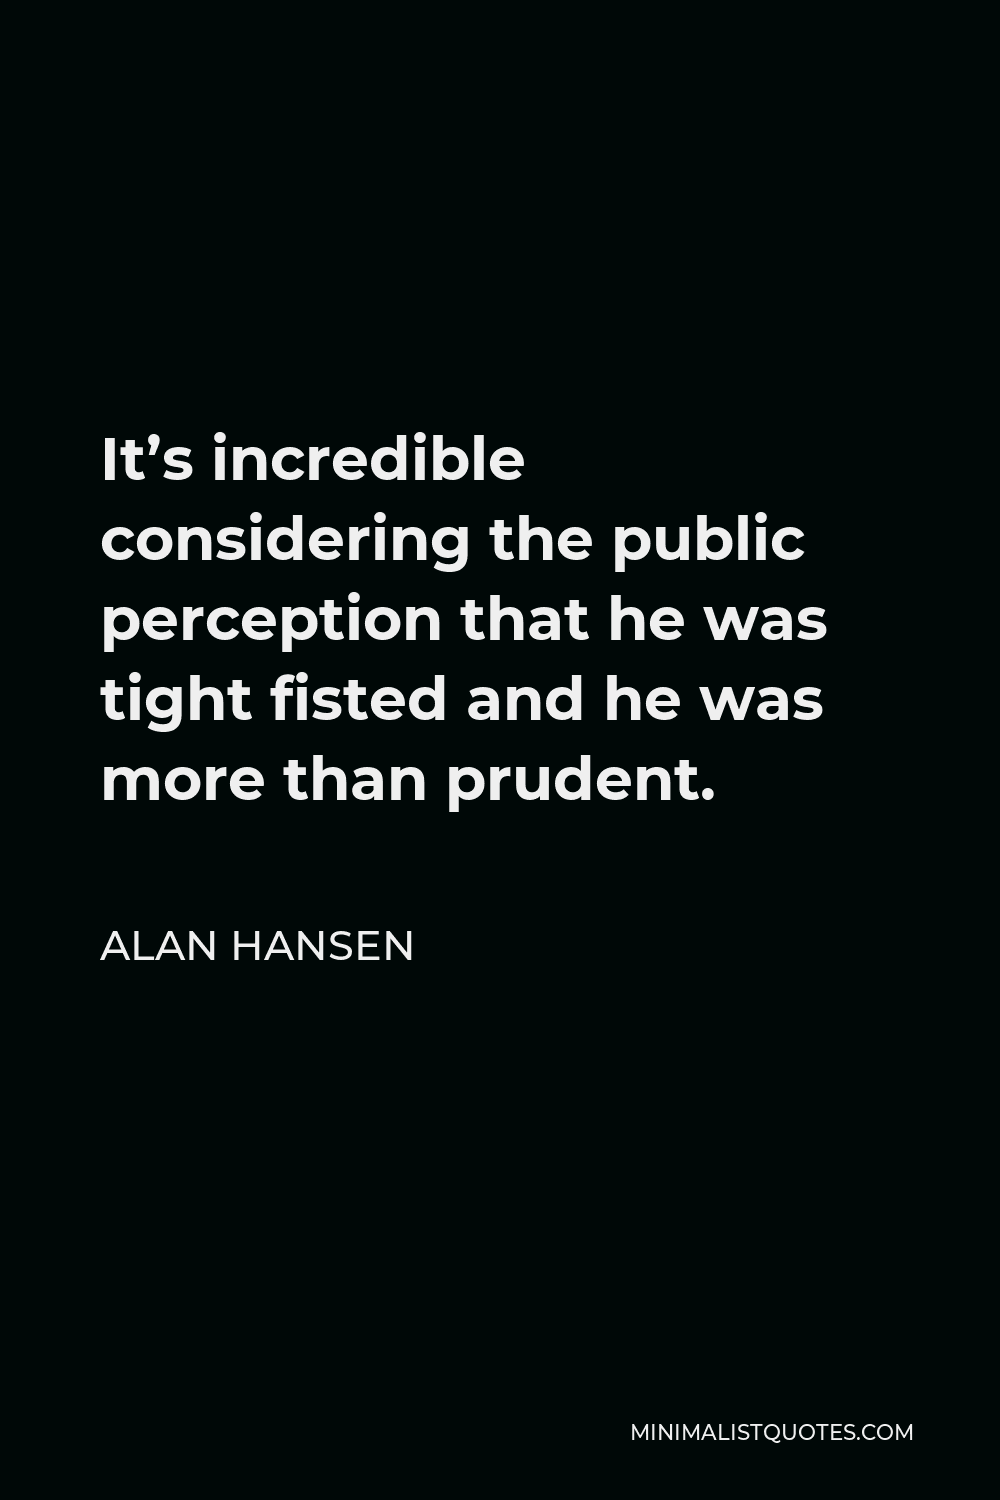 Alan Hansen Quote - It’s incredible considering the public perception that he was tight fisted and he was more than prudent.